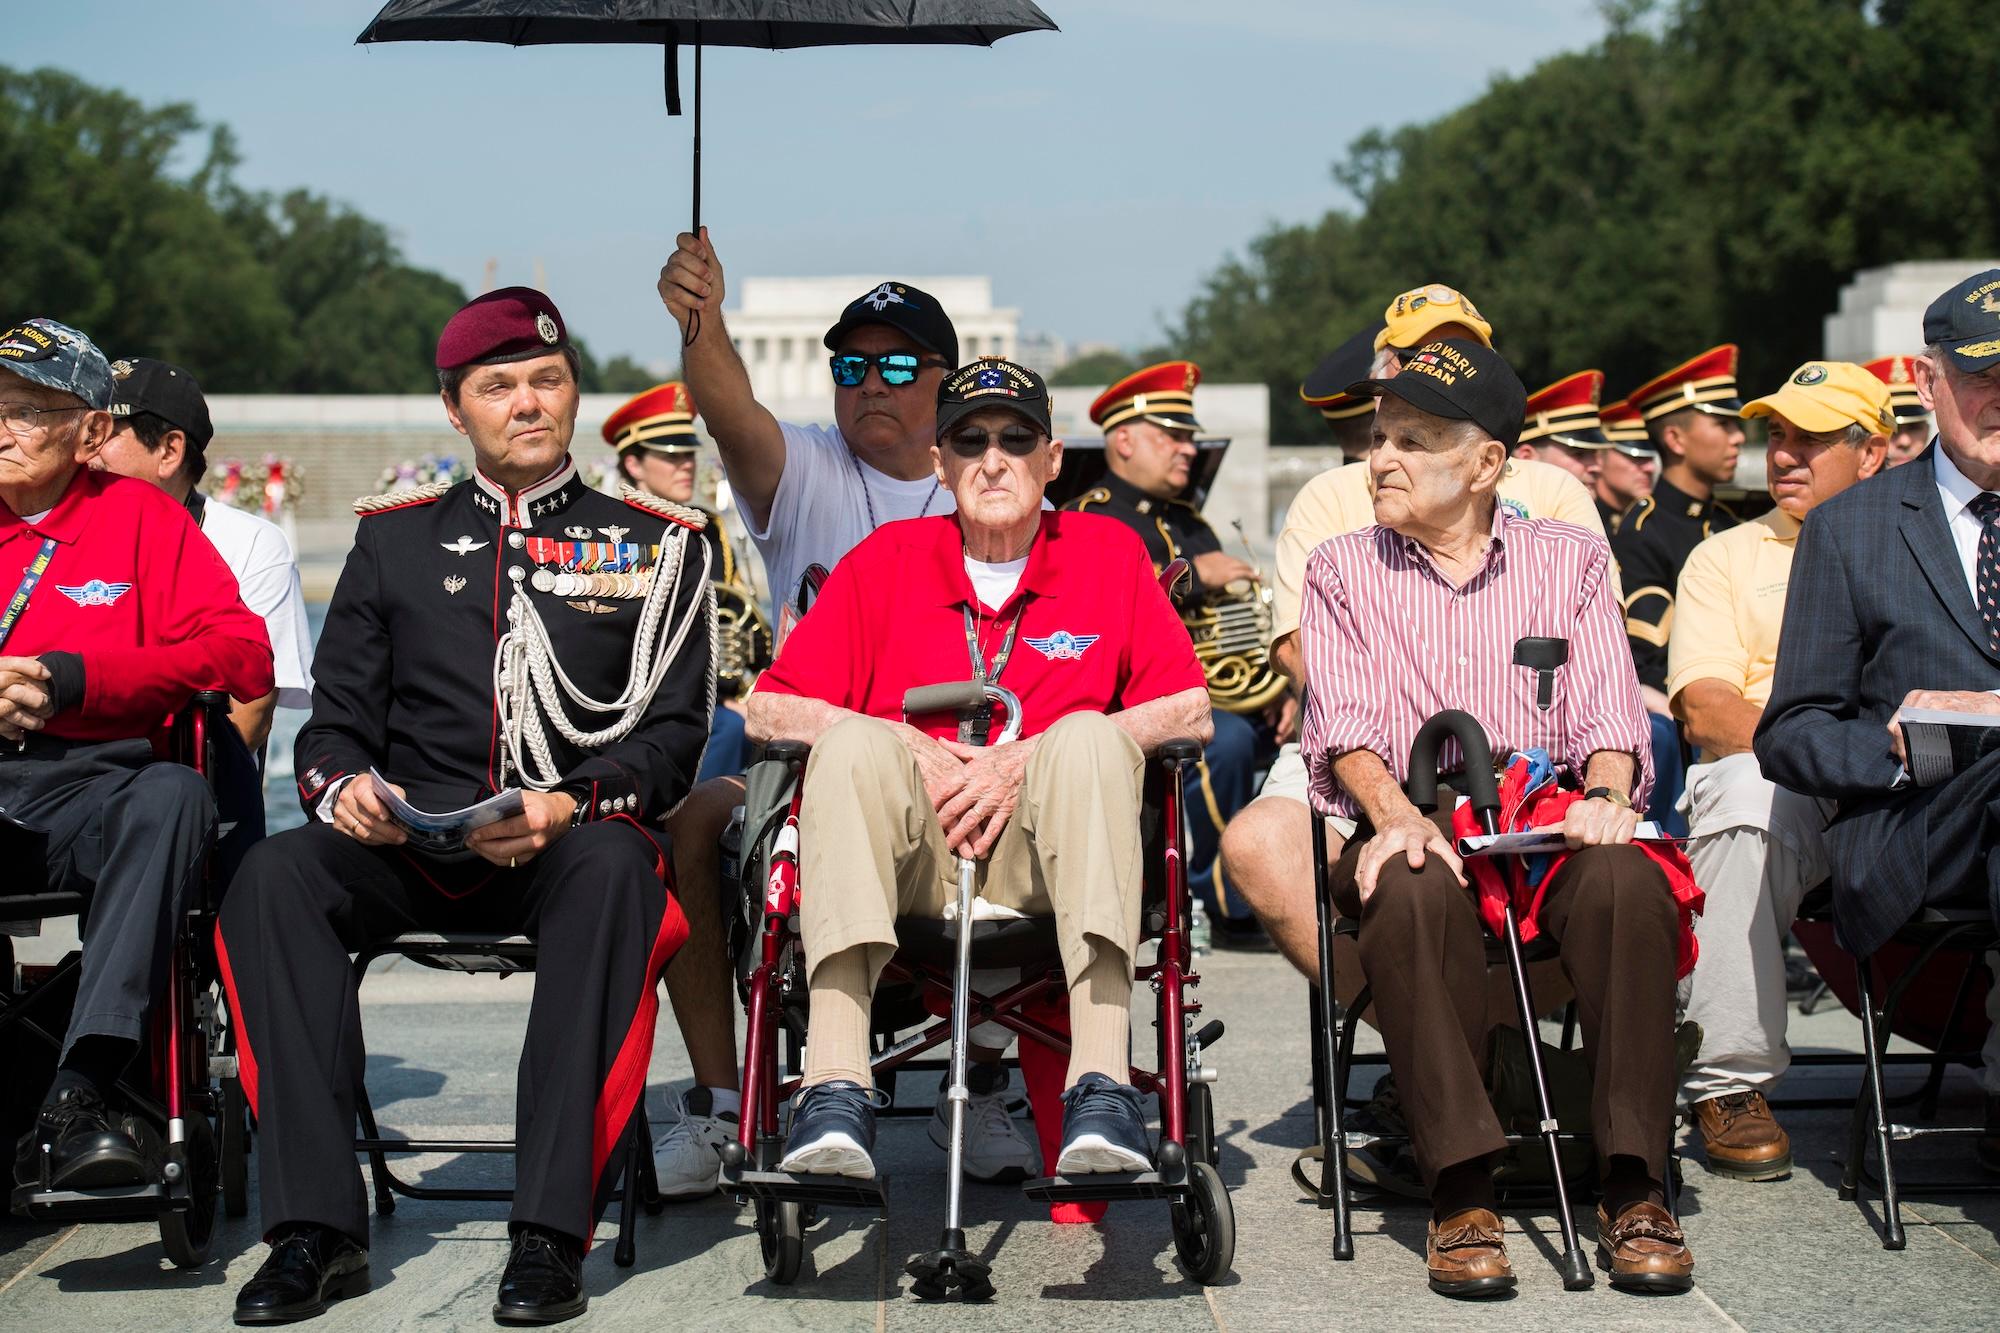 WWII veterans, some flown in from New Mexico on an Honor Flight, gathered at the National World War II Memorial in June 2019 to commemorate D-Day's 75th anniversary